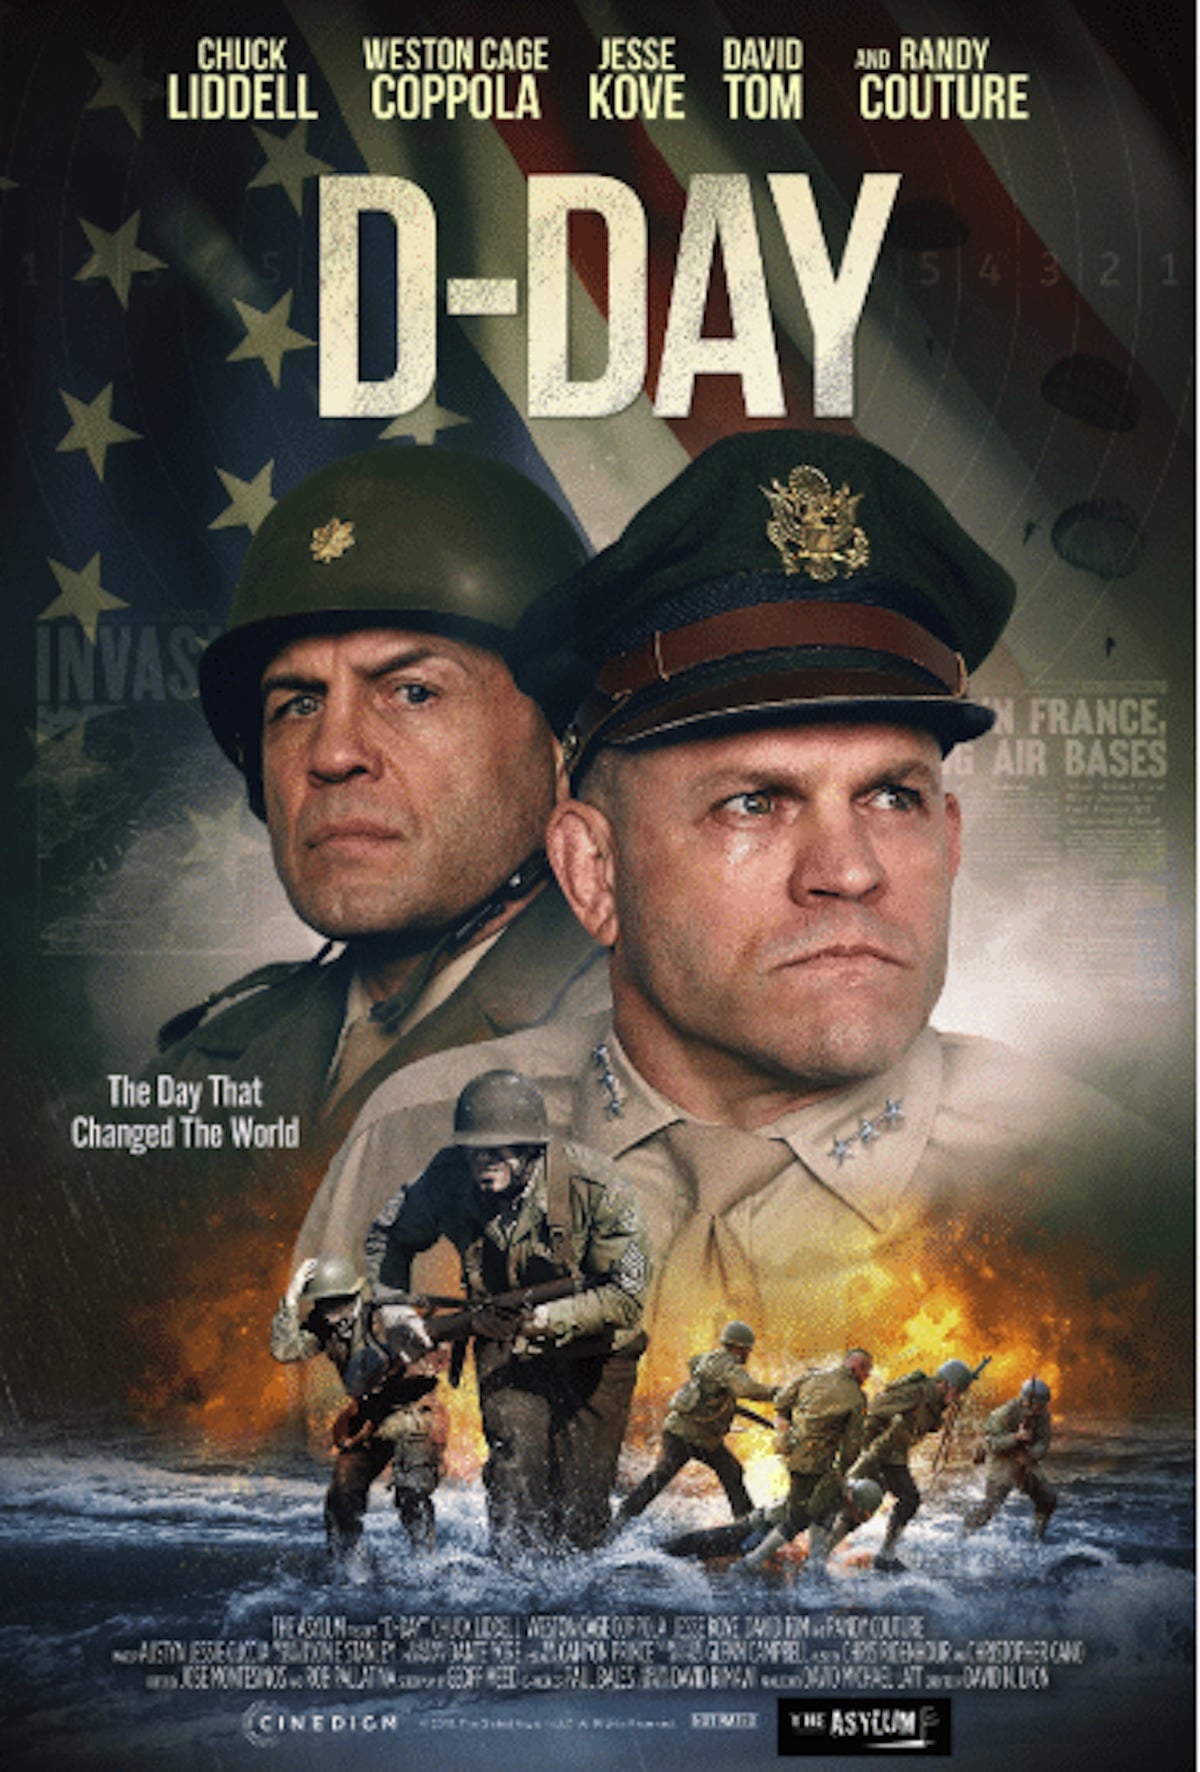 Exclusive images and poster for DDay starring Chuck Liddell, Randy